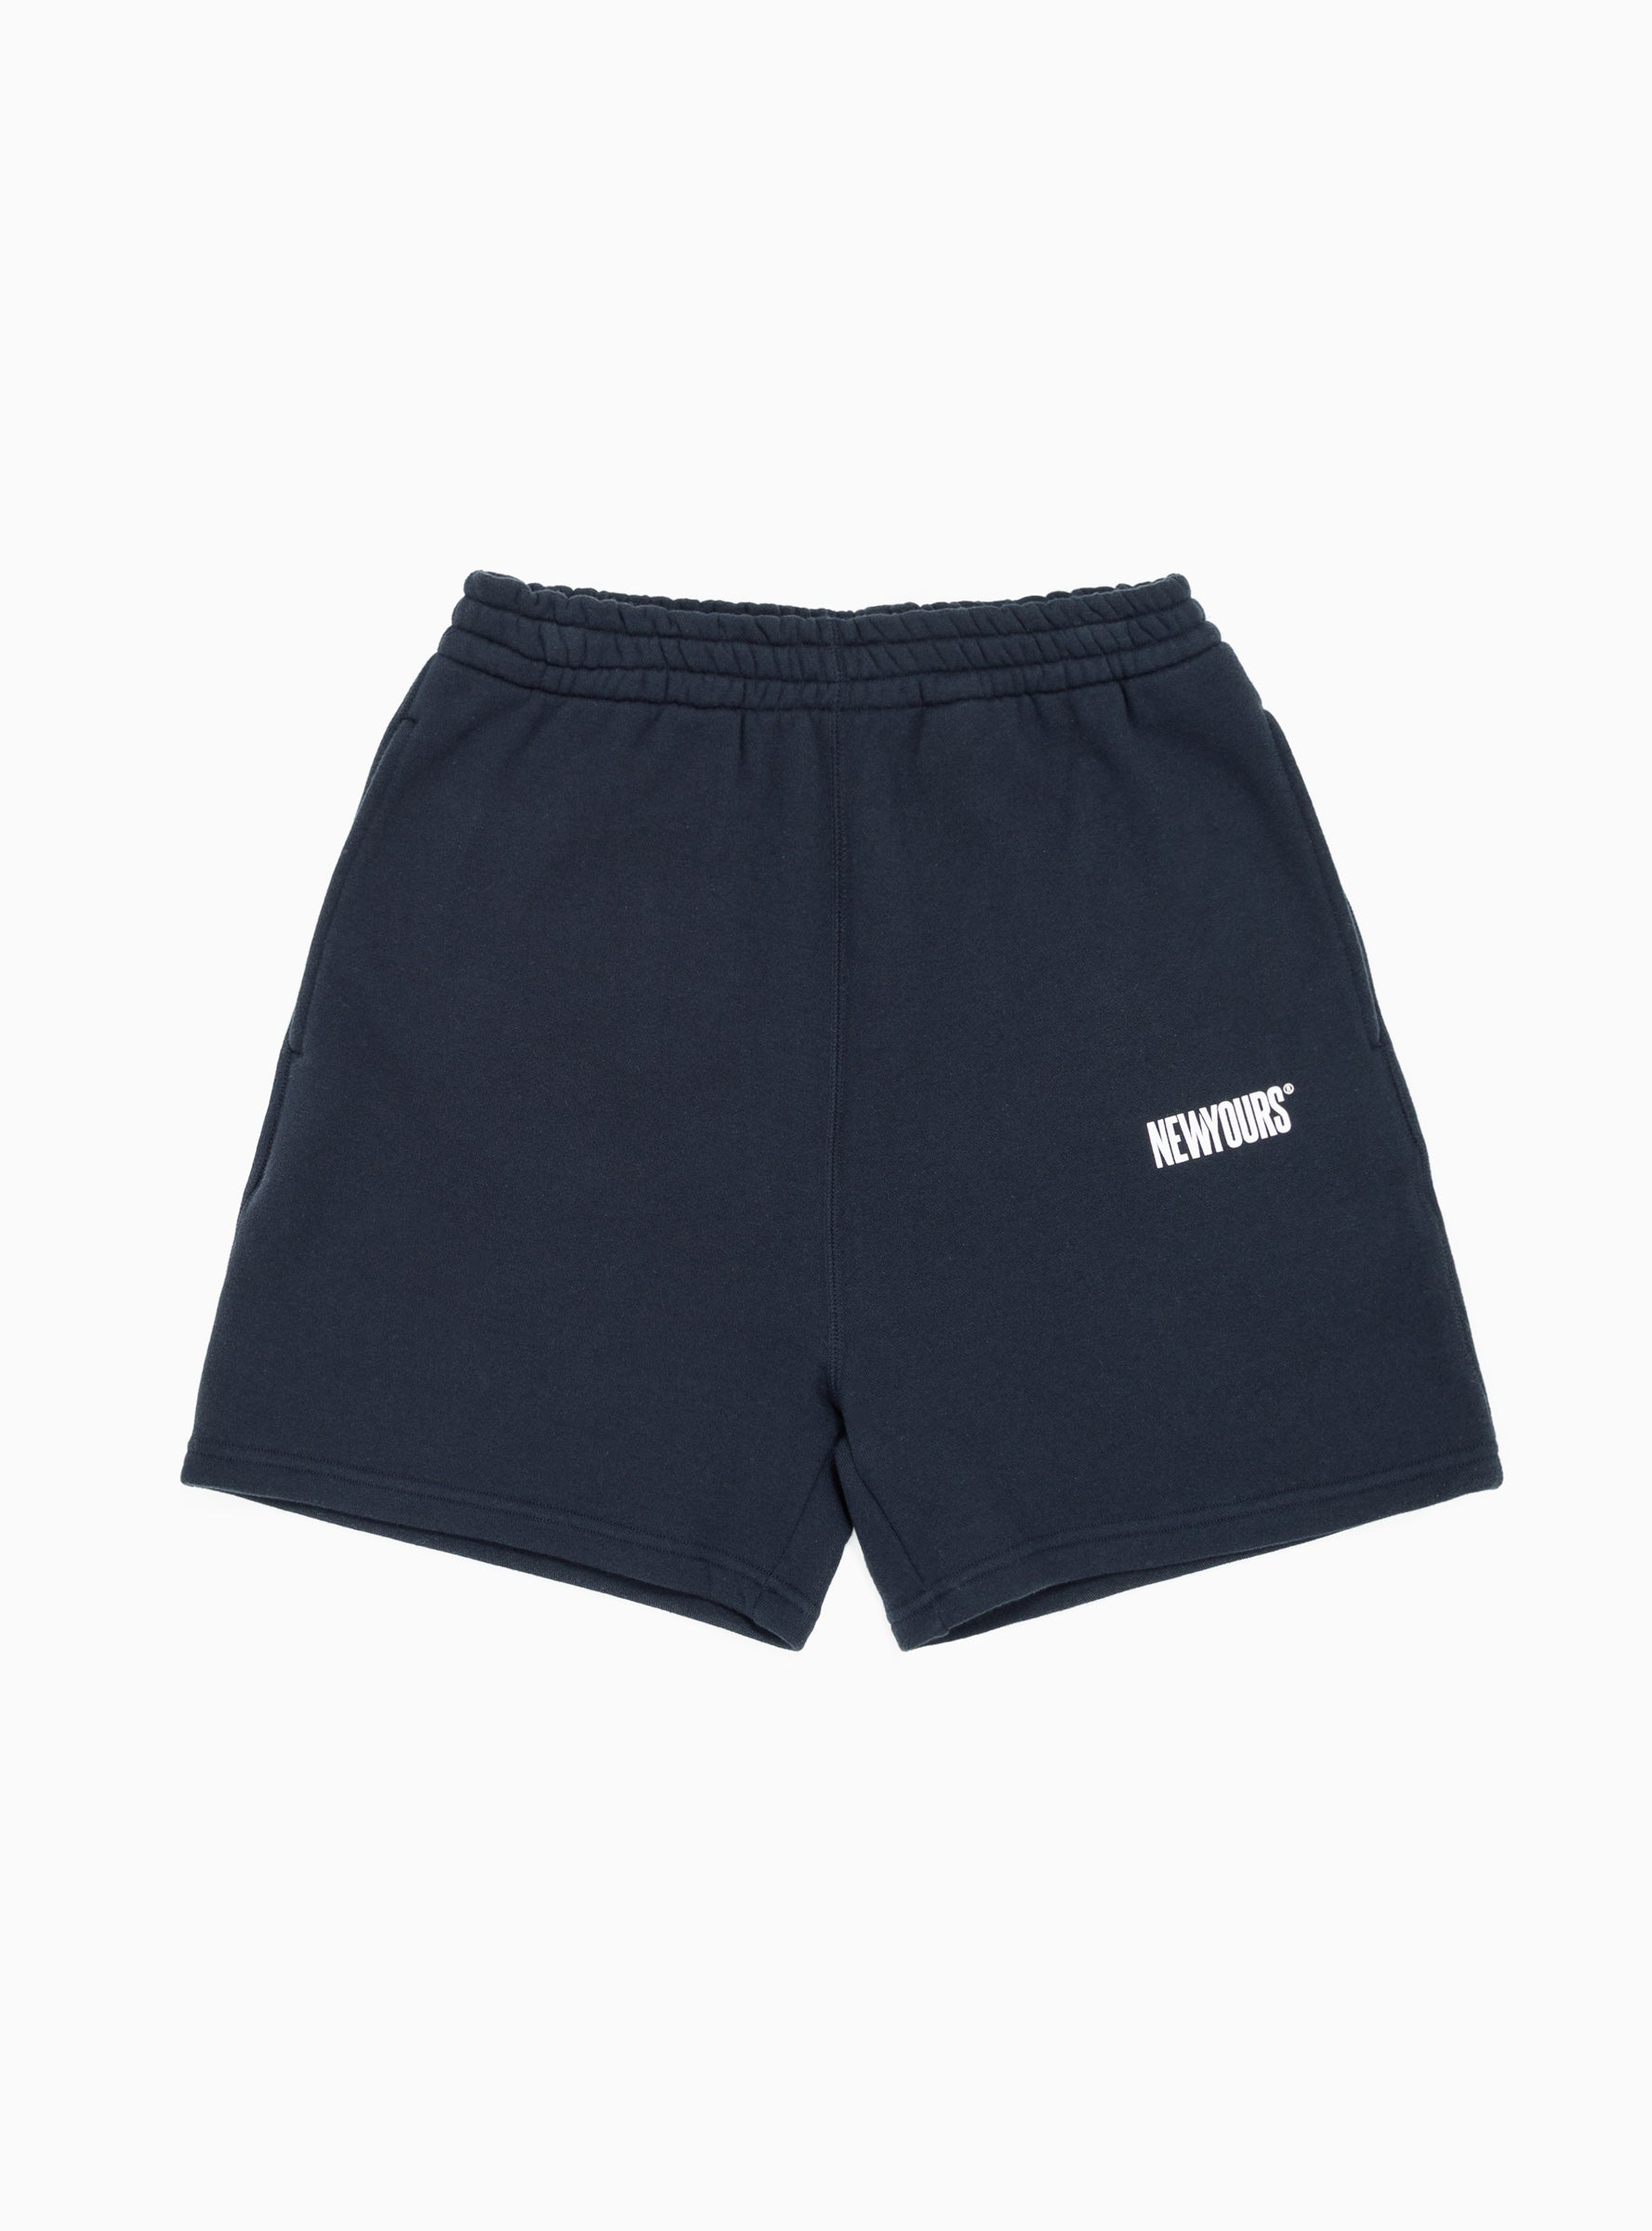 NEWYOURS Basic Sweat Shorts Navy by SOFTHYPHEN | Couverture & The